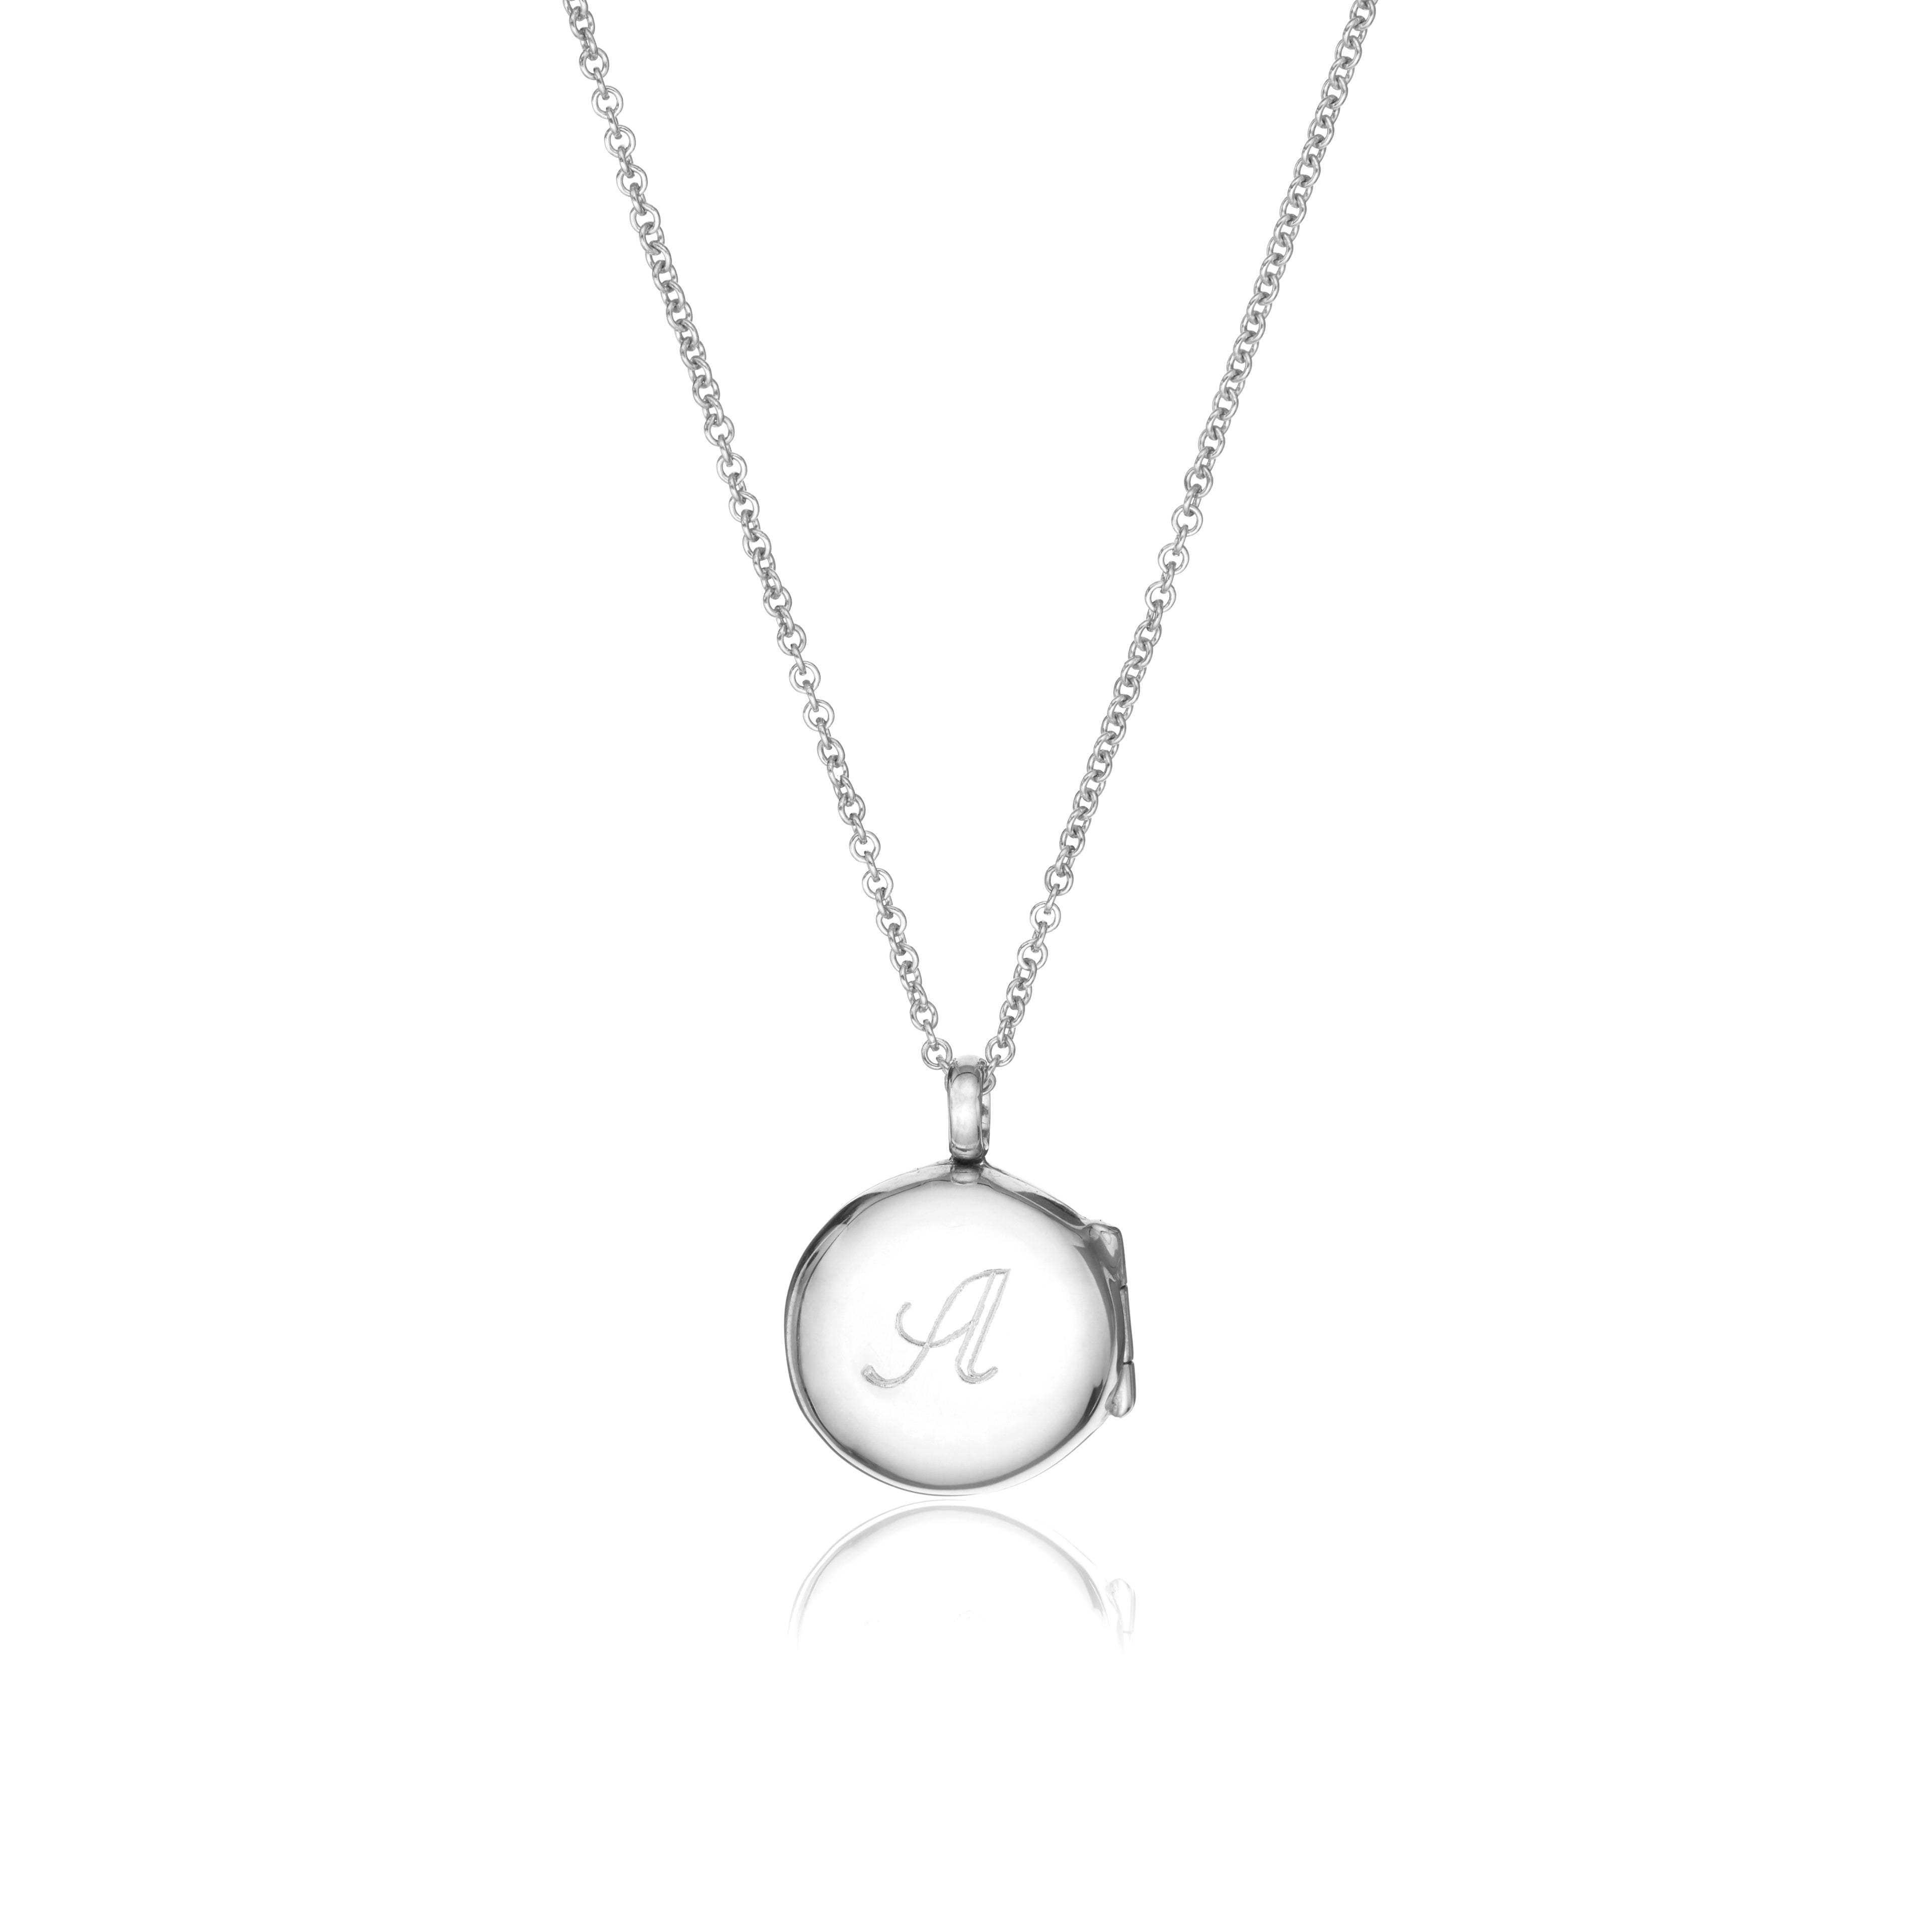 Silver small round diamond locket necklace with the letter 'A' engraved